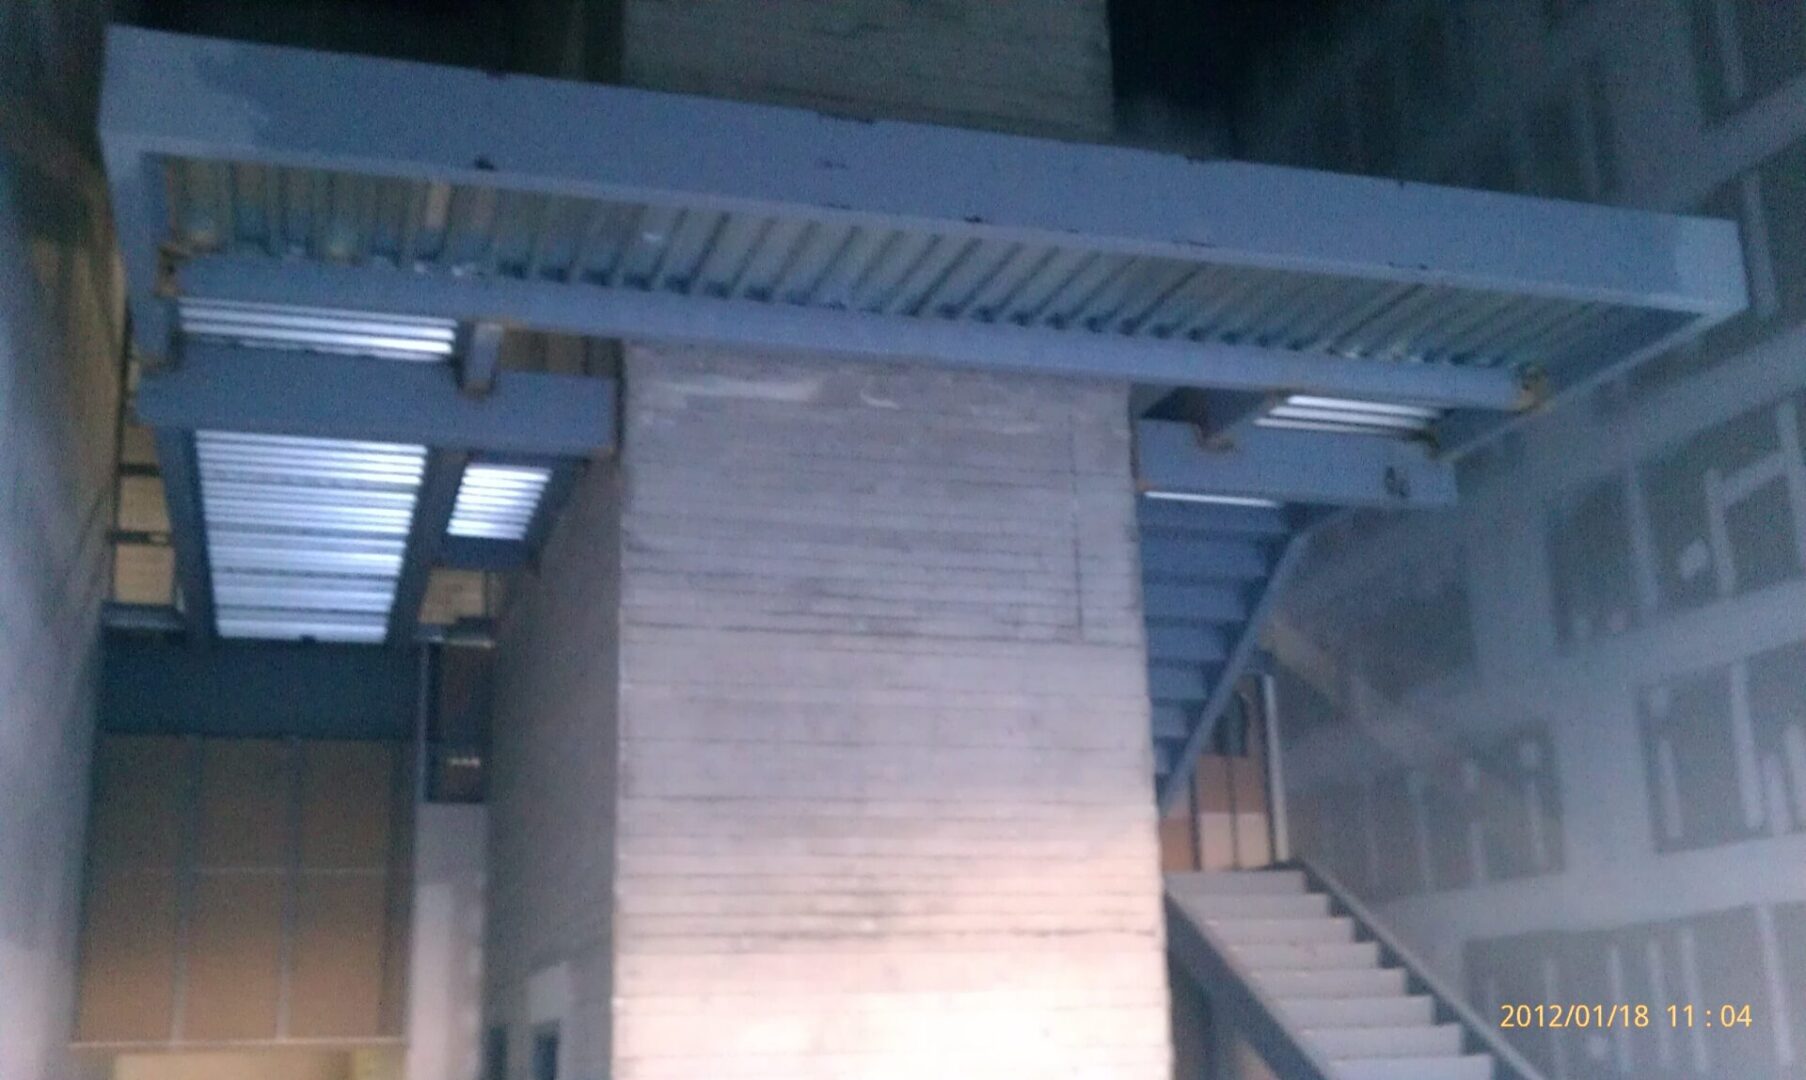 A Blurry Image of a Cement Structure